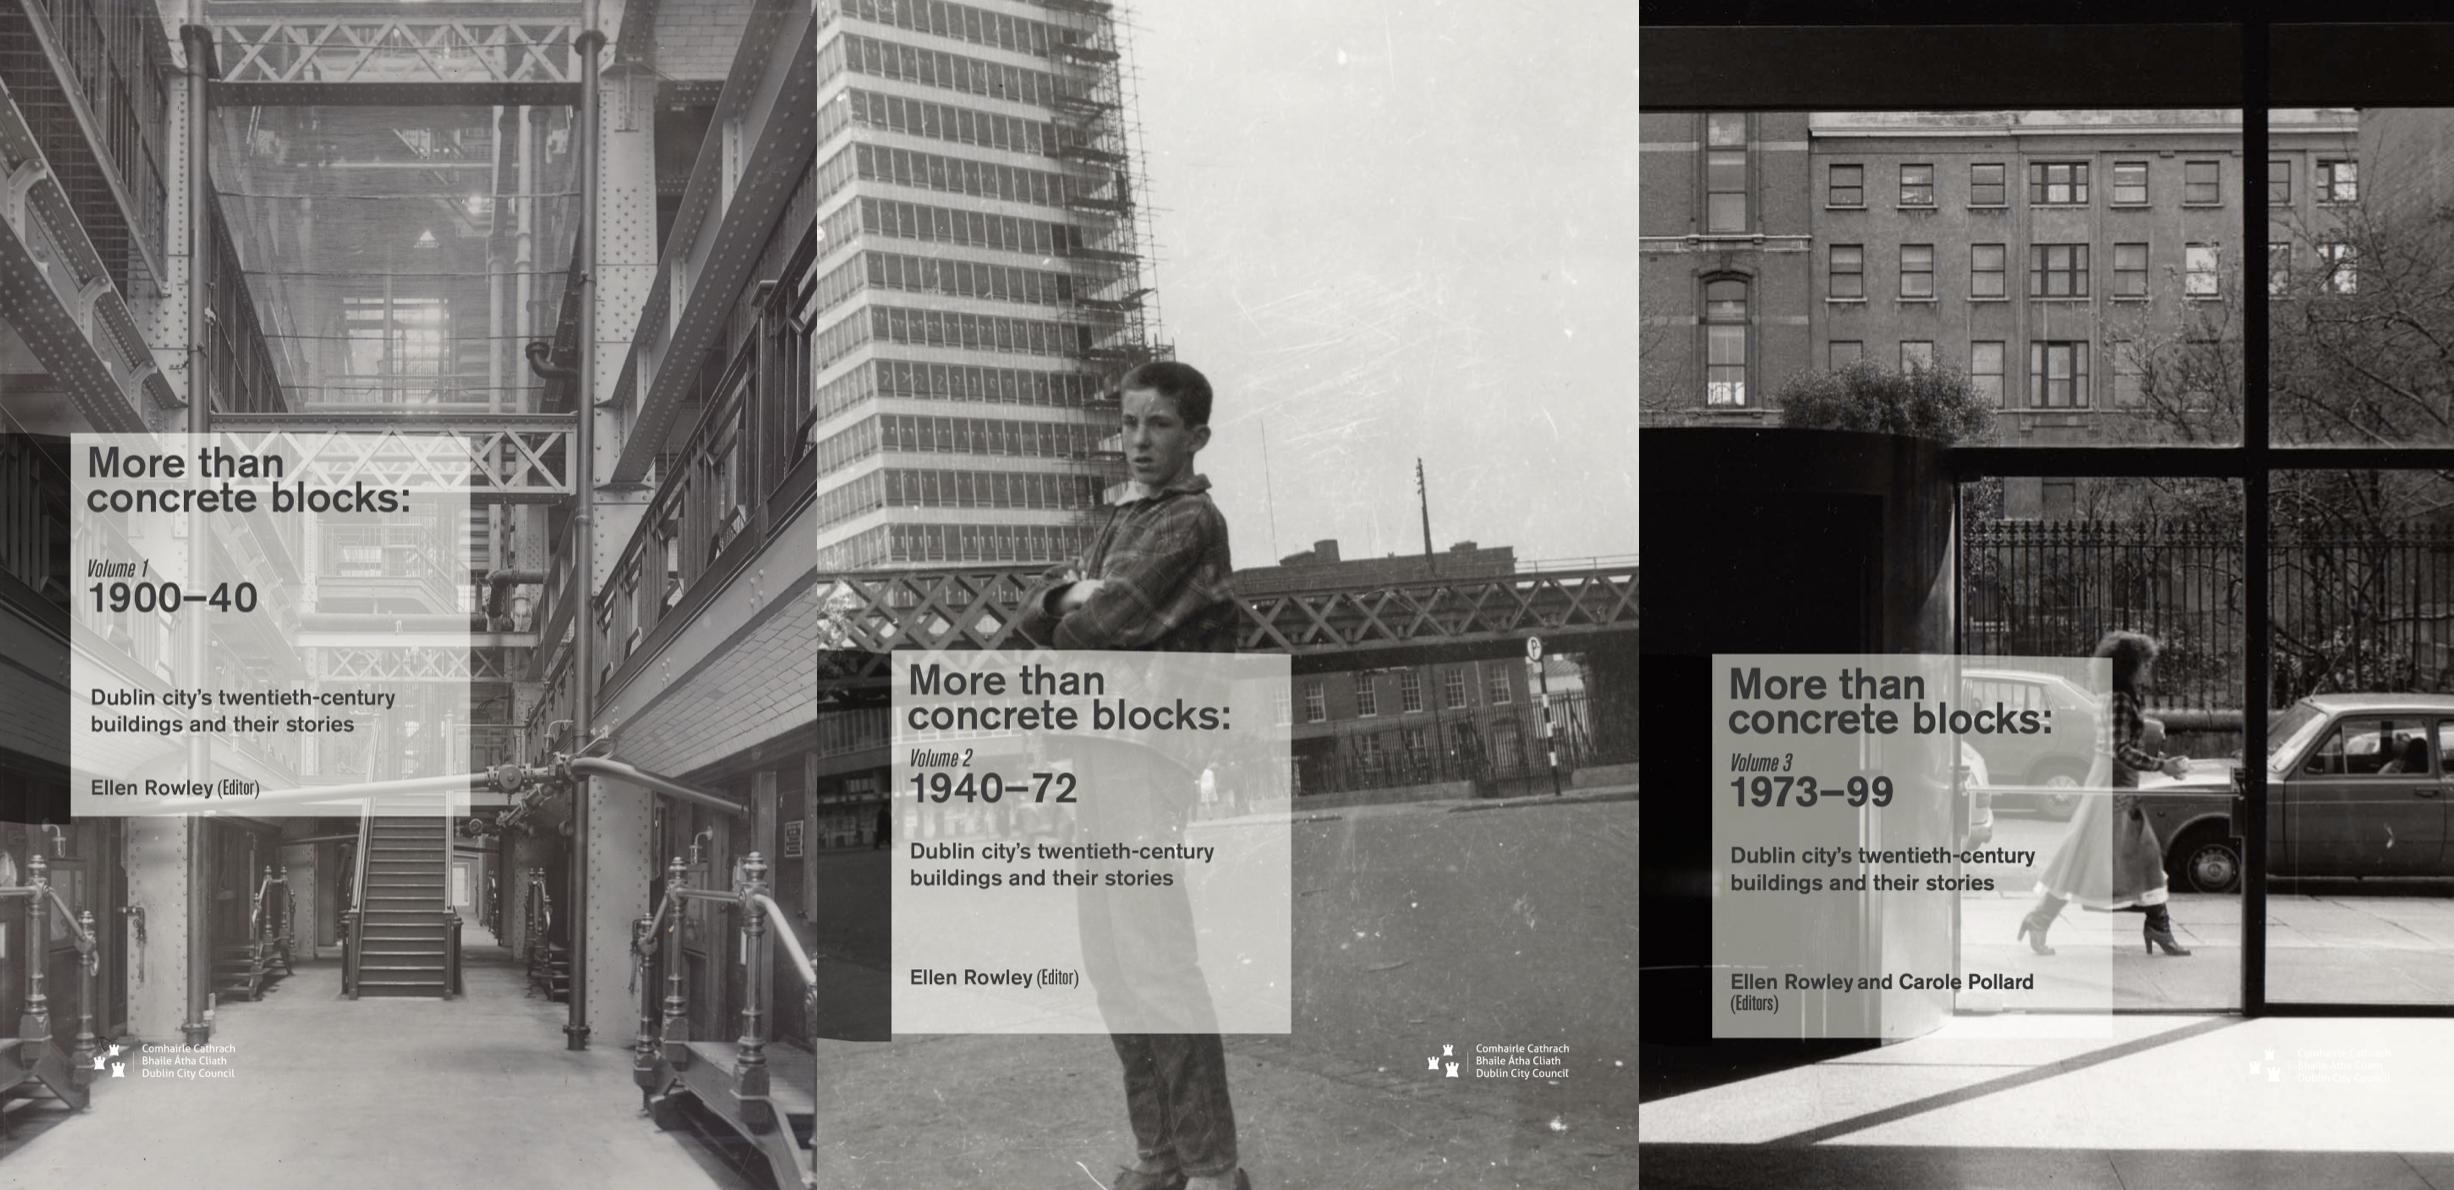 Three black and white photographs of architectural views, each with text saying "More than concrete blocks".